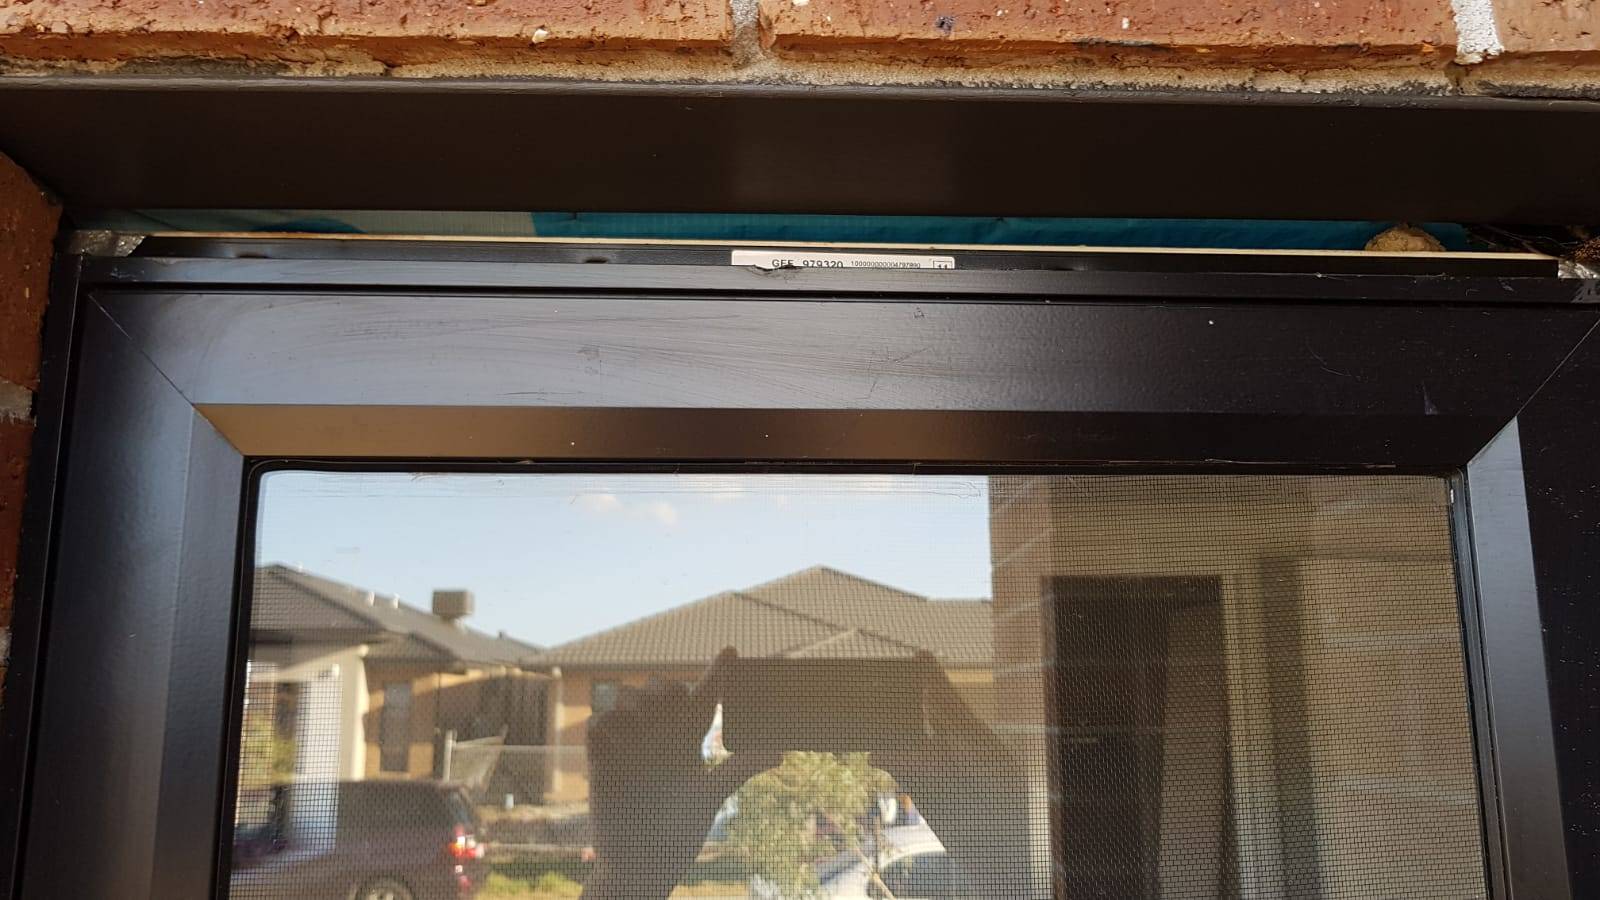 Building with Metricon - Gap between brick and window frame